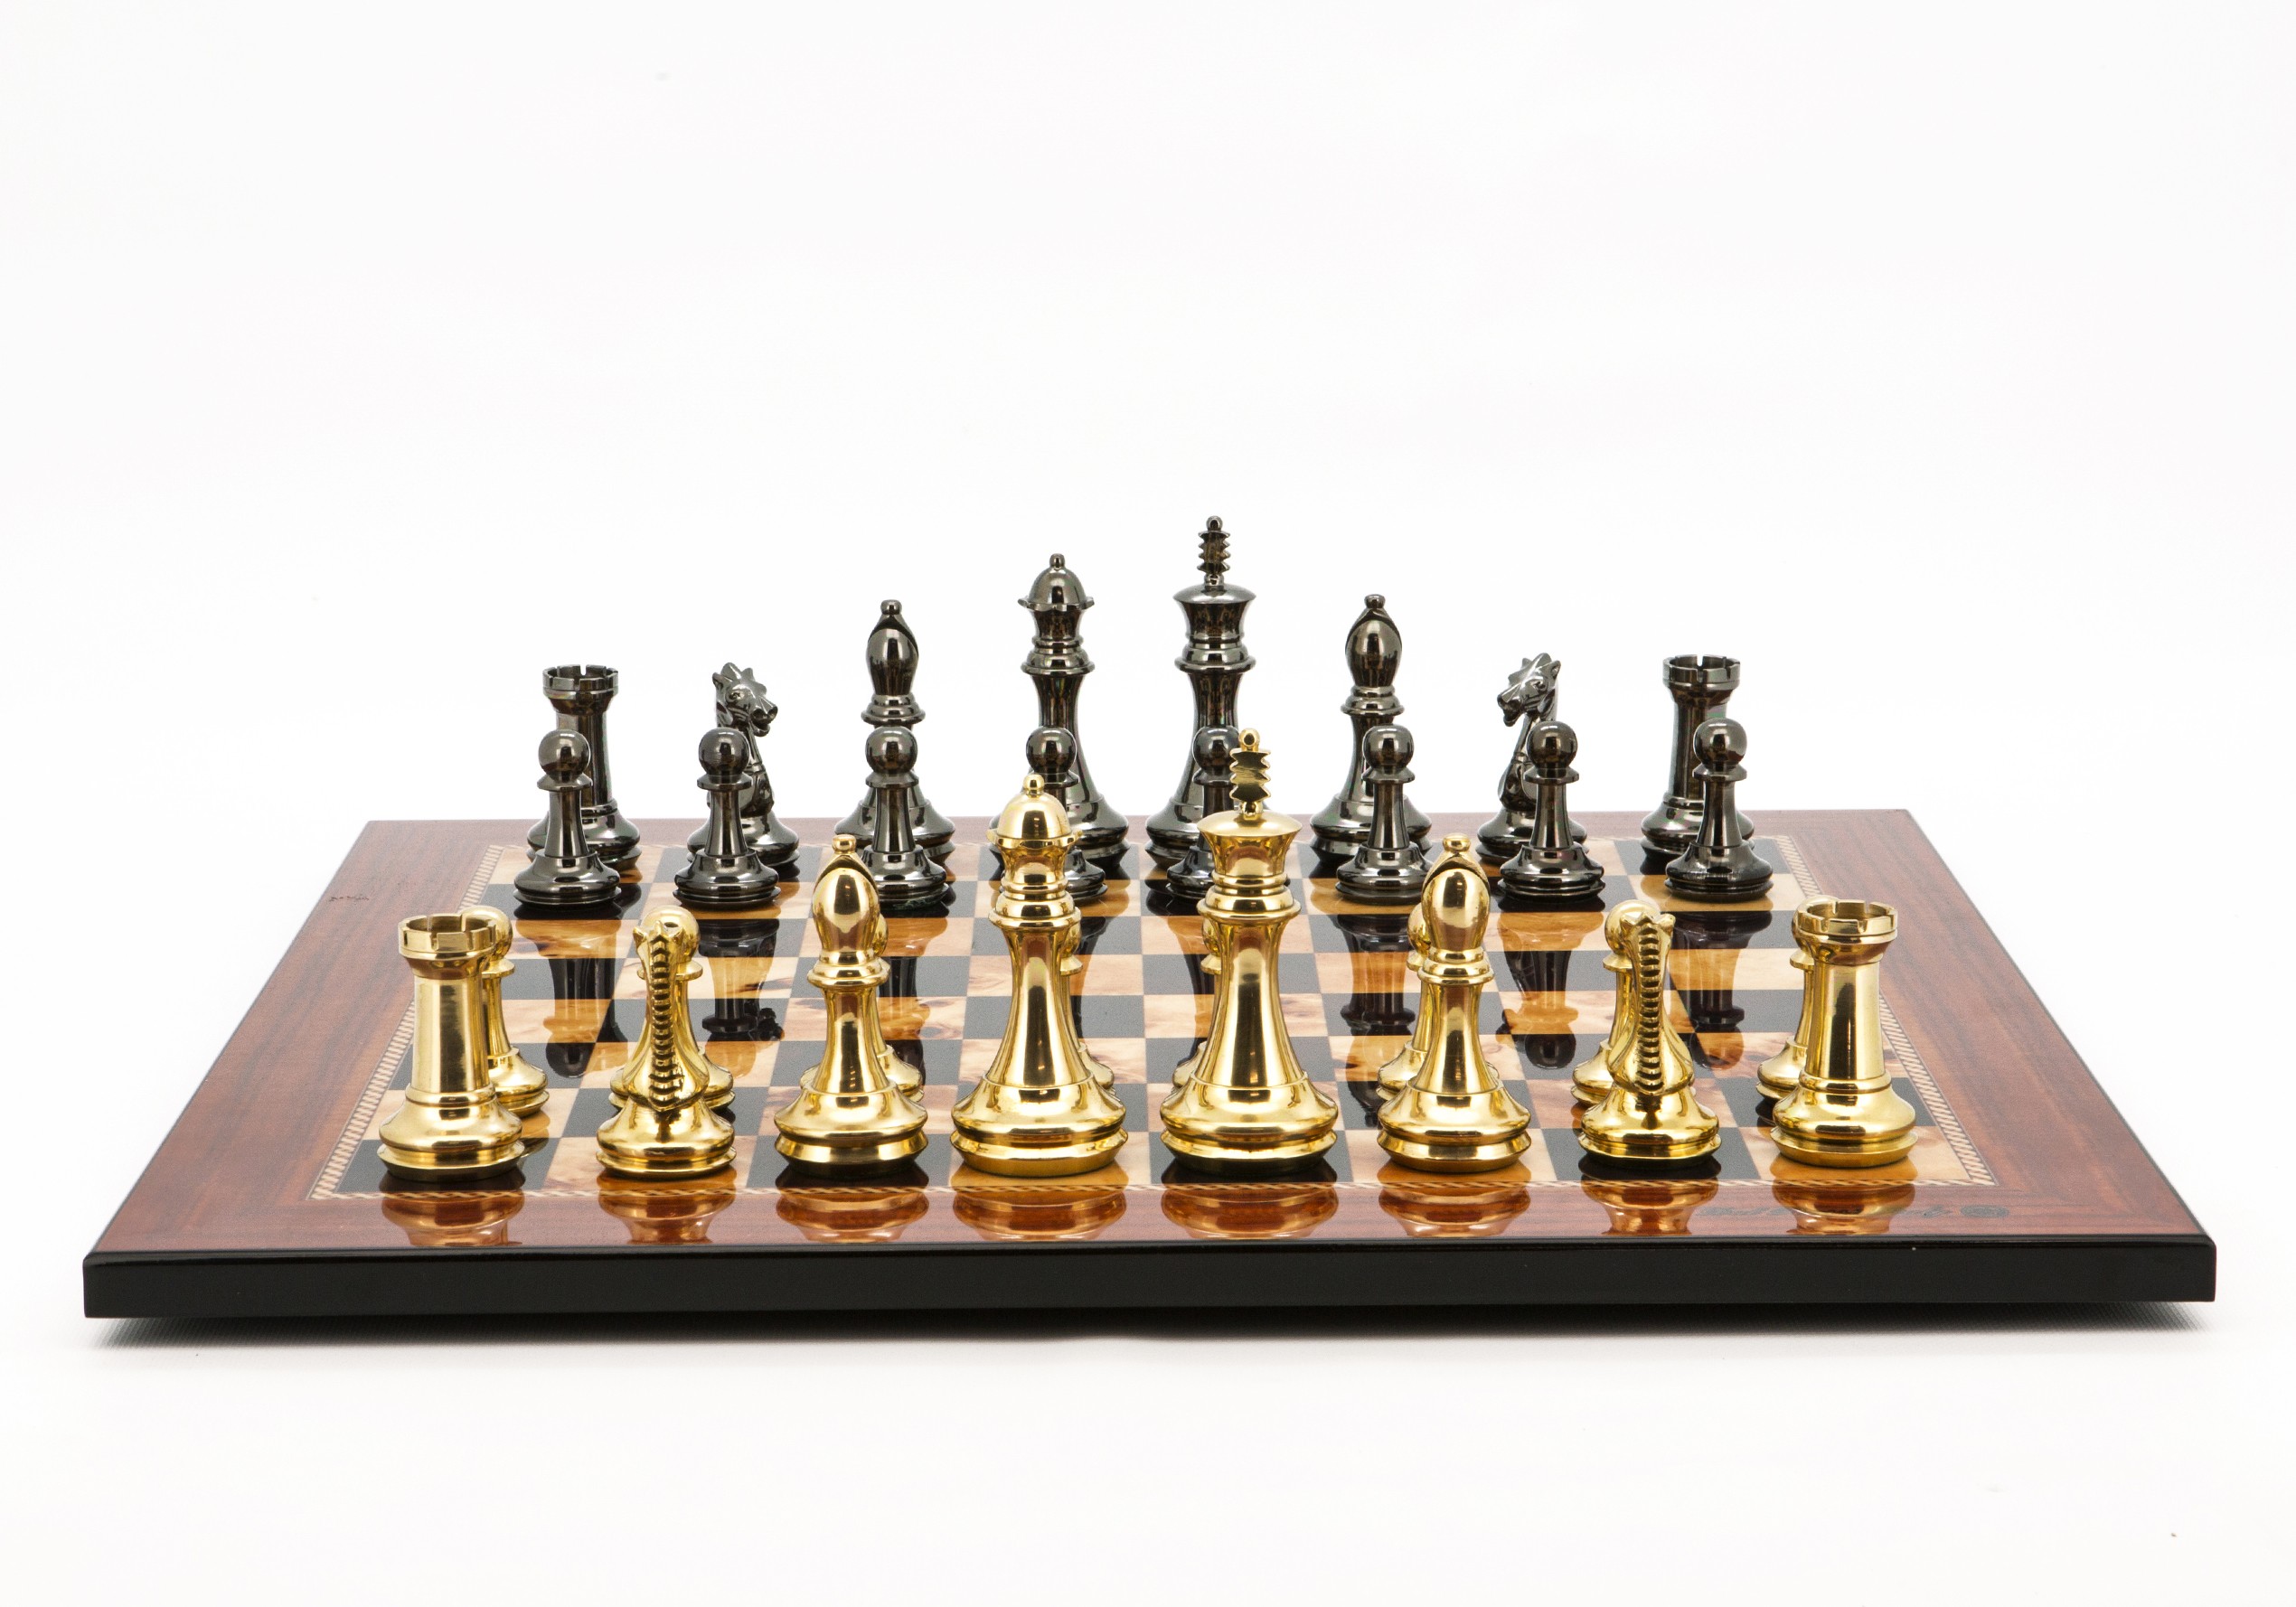 Dal Rossi Italy Chess Set Walnut Finish Board 50cm, With Very Heavy Brass Staunton Gold and Silver chessmen 110mm